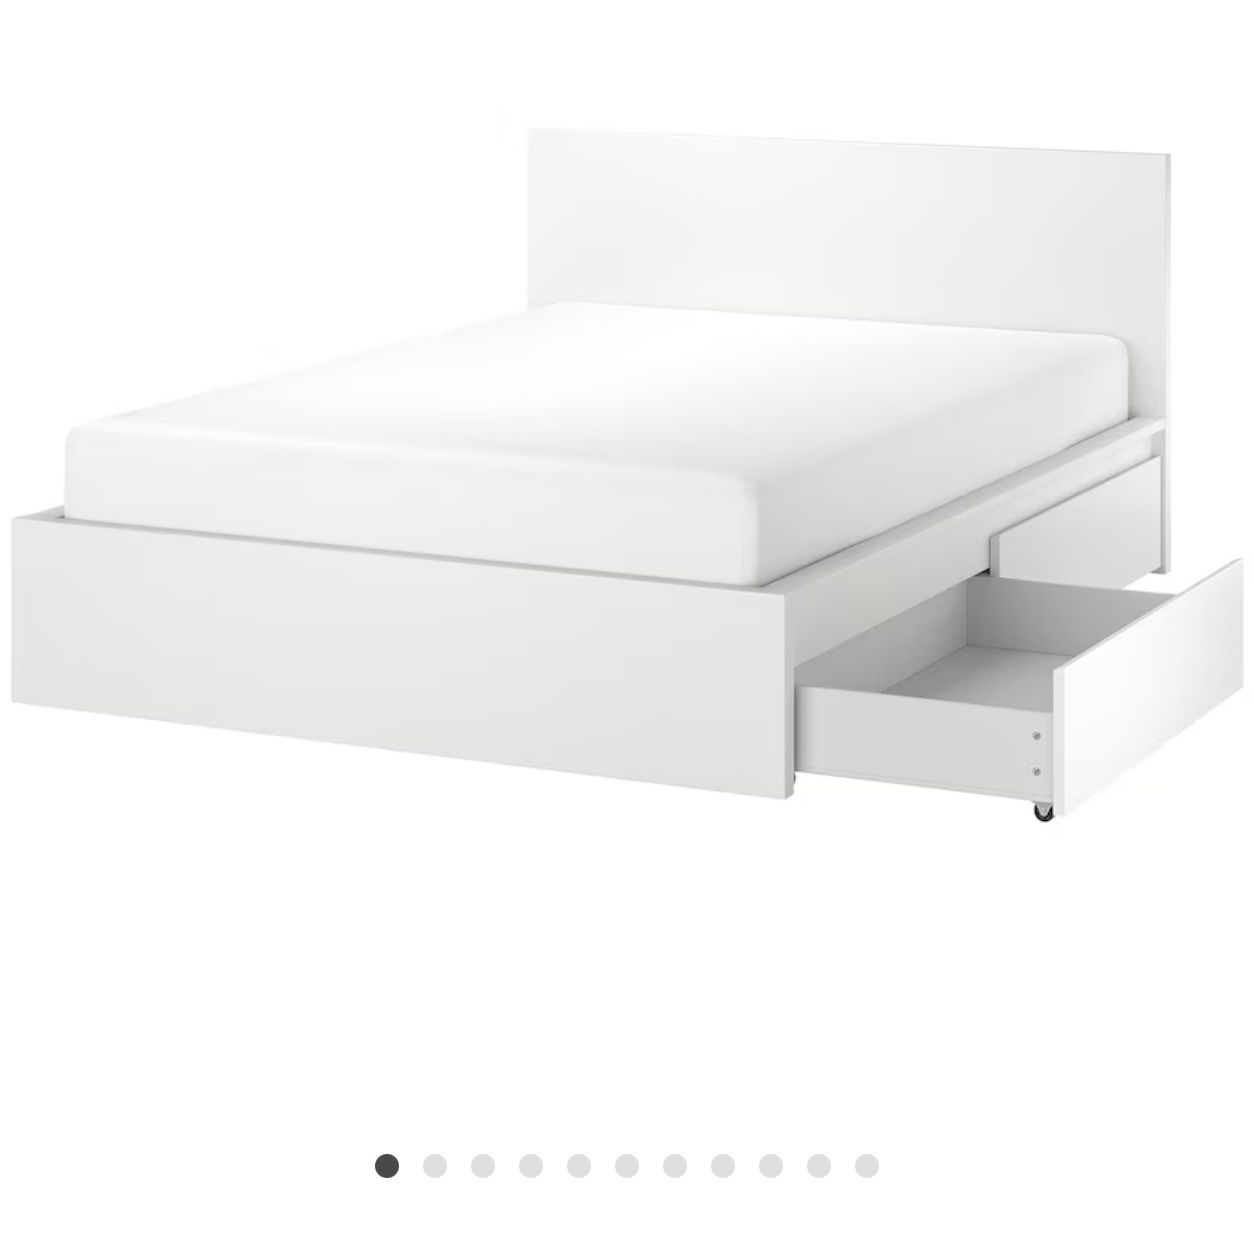 Malm Queen Bed Frame With 4 Drawers Of Storage